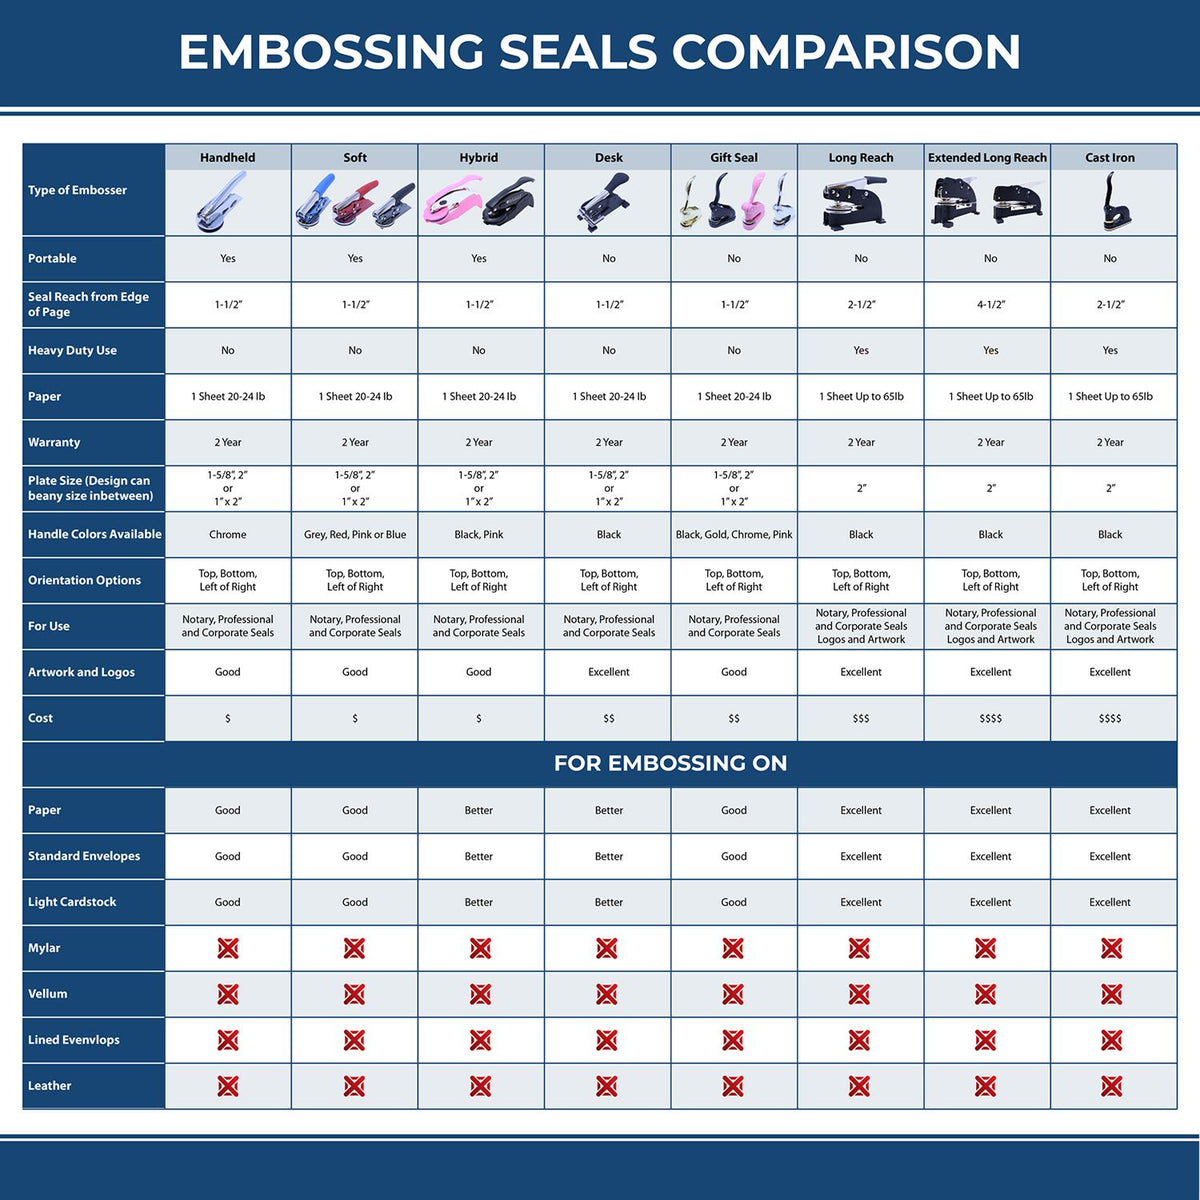 A comparison chart for the different types of mount models available for the New York Desk Architect Embossing Seal.